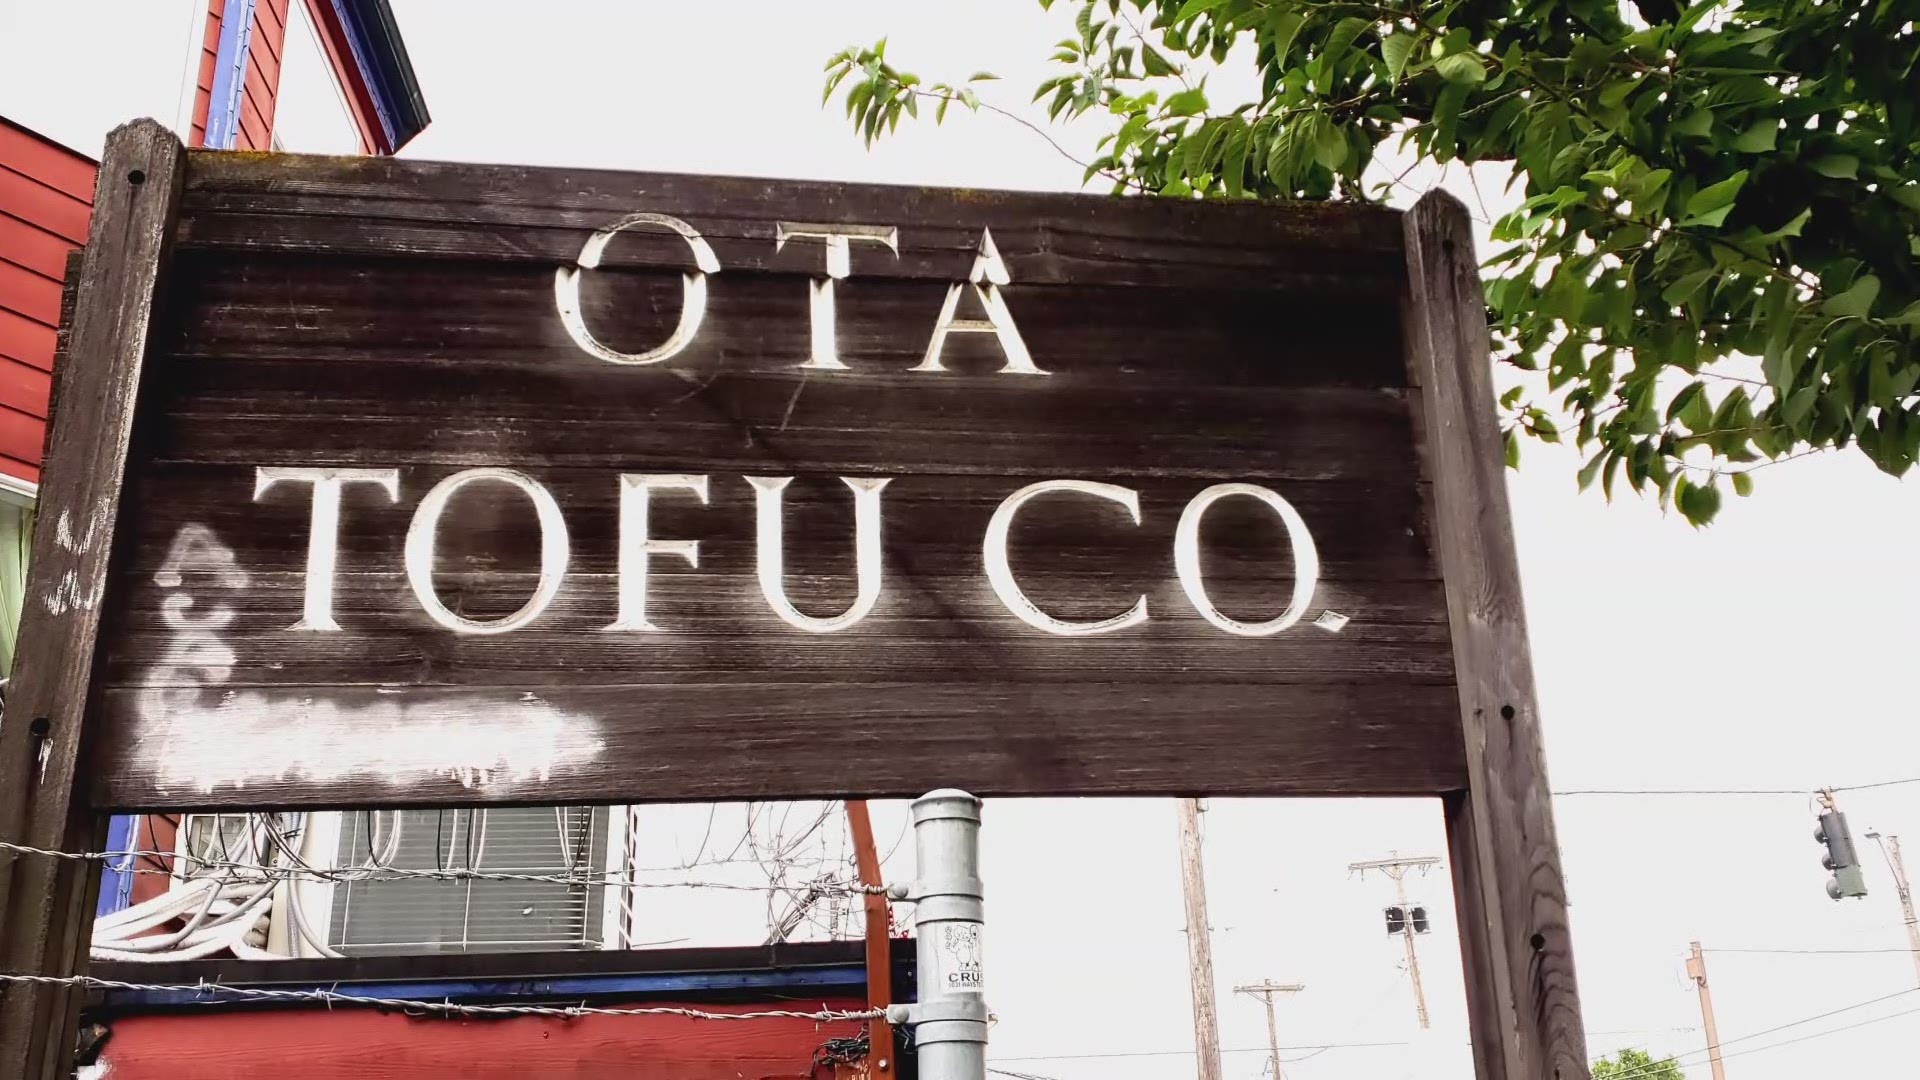 Ota Tofu celebrates it's 110th anniversary this year. The new owners since 2019 have a good problem on their hands: everyone wants their product.